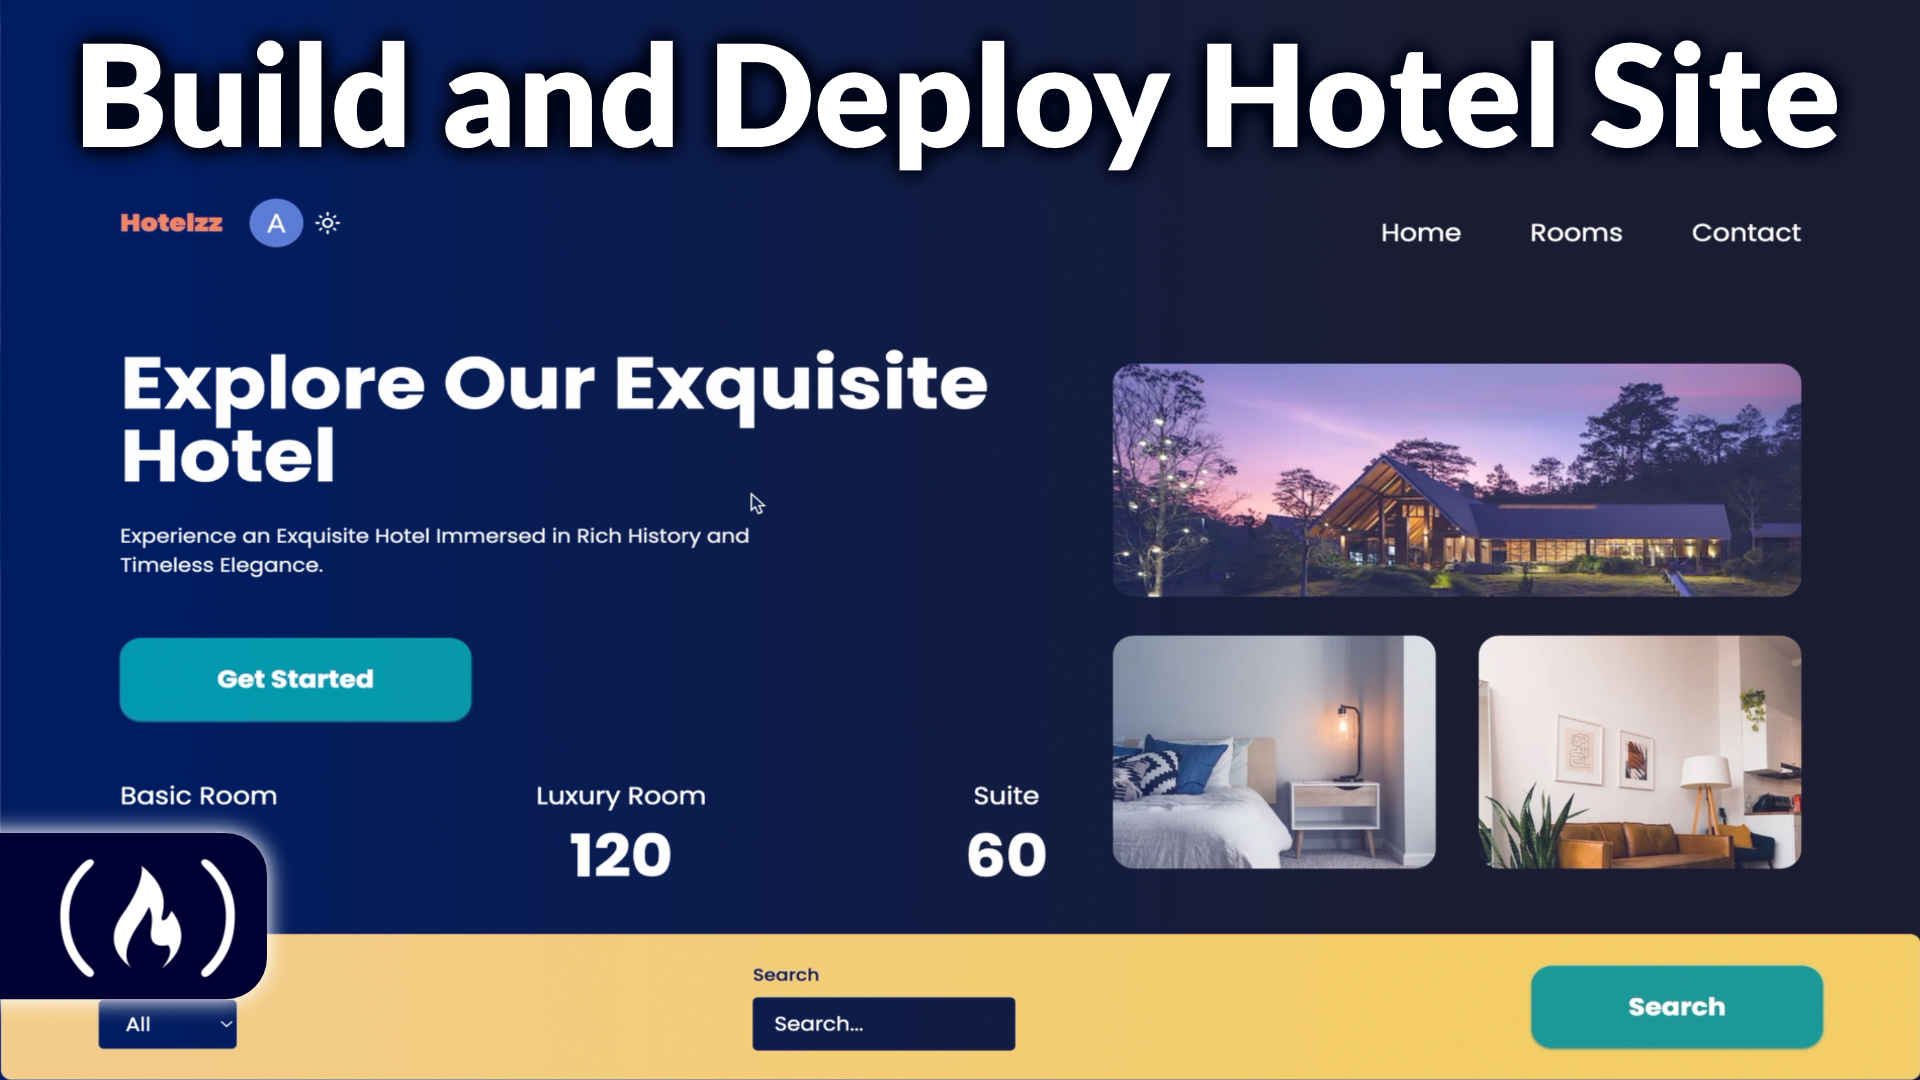 Build a Hotel Management Site with Next.js, Sanity.io, and Tailwind CSS